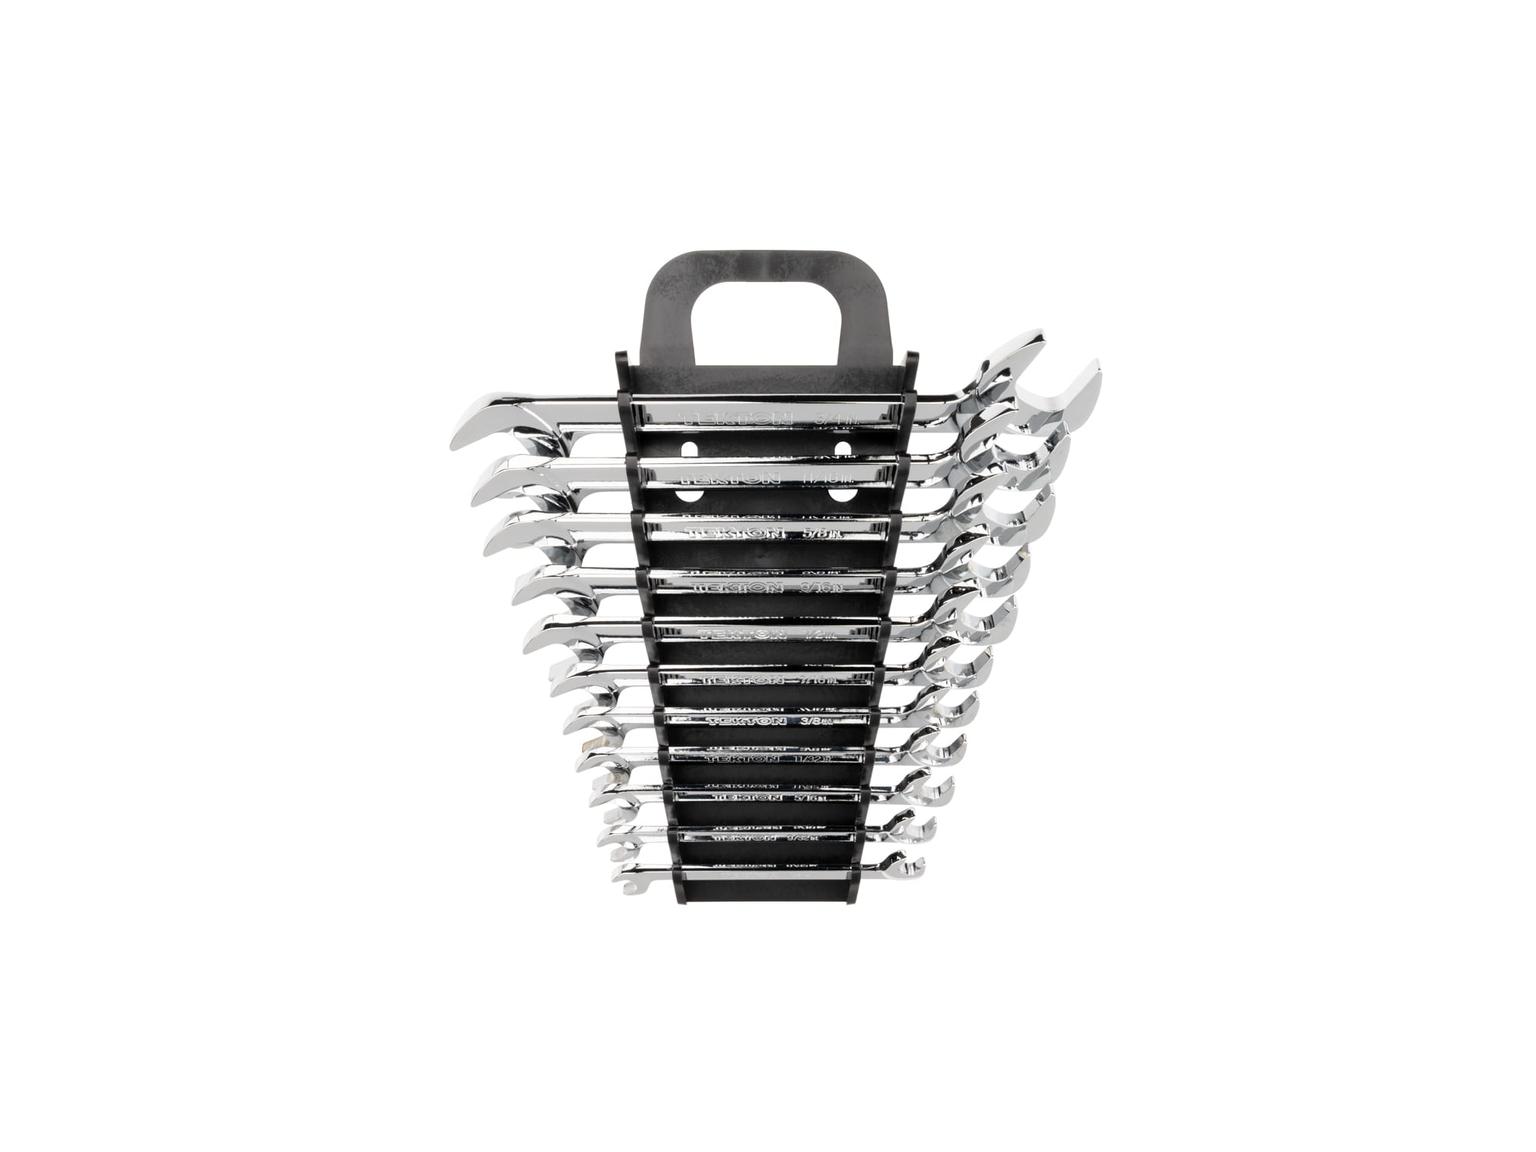 Angle Head Open End Wrench Set with Holder, 11-Piece (1/4-3/4 in.)